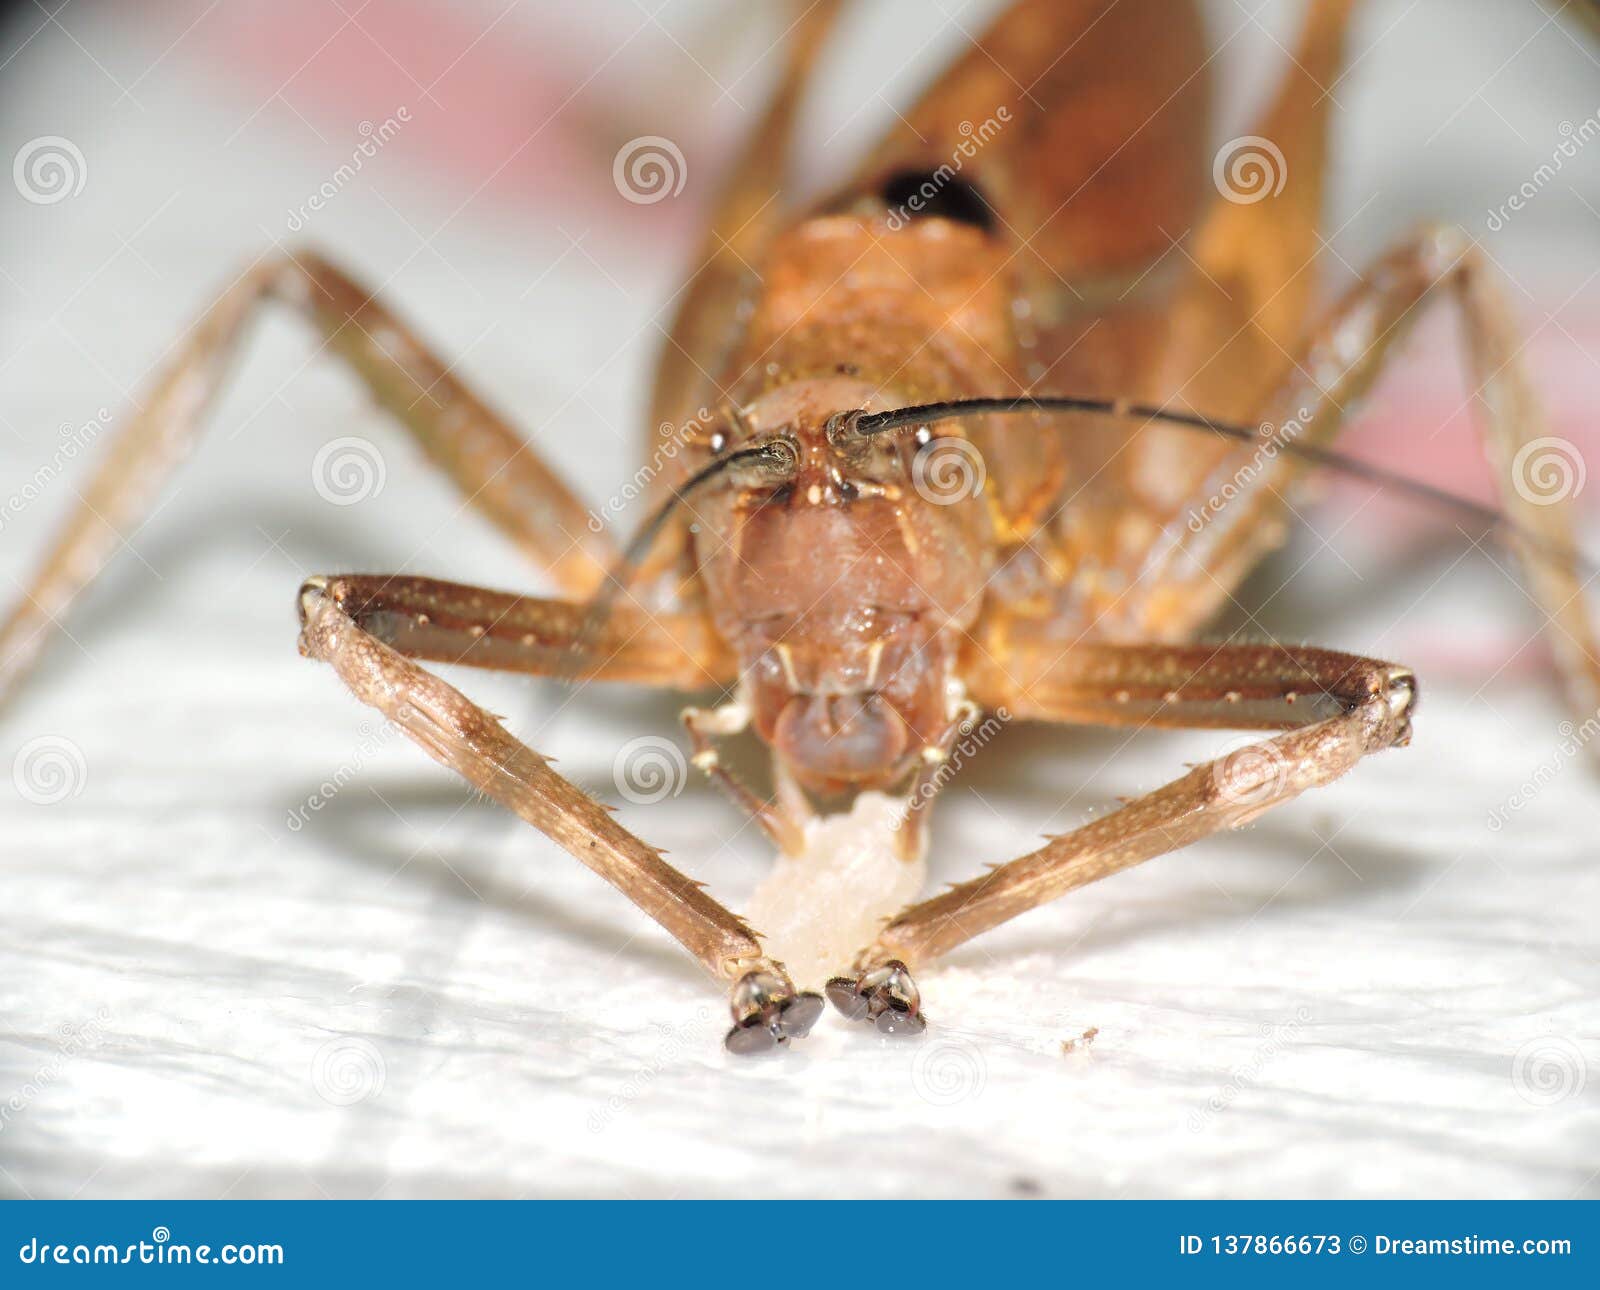 a cricket eating rice